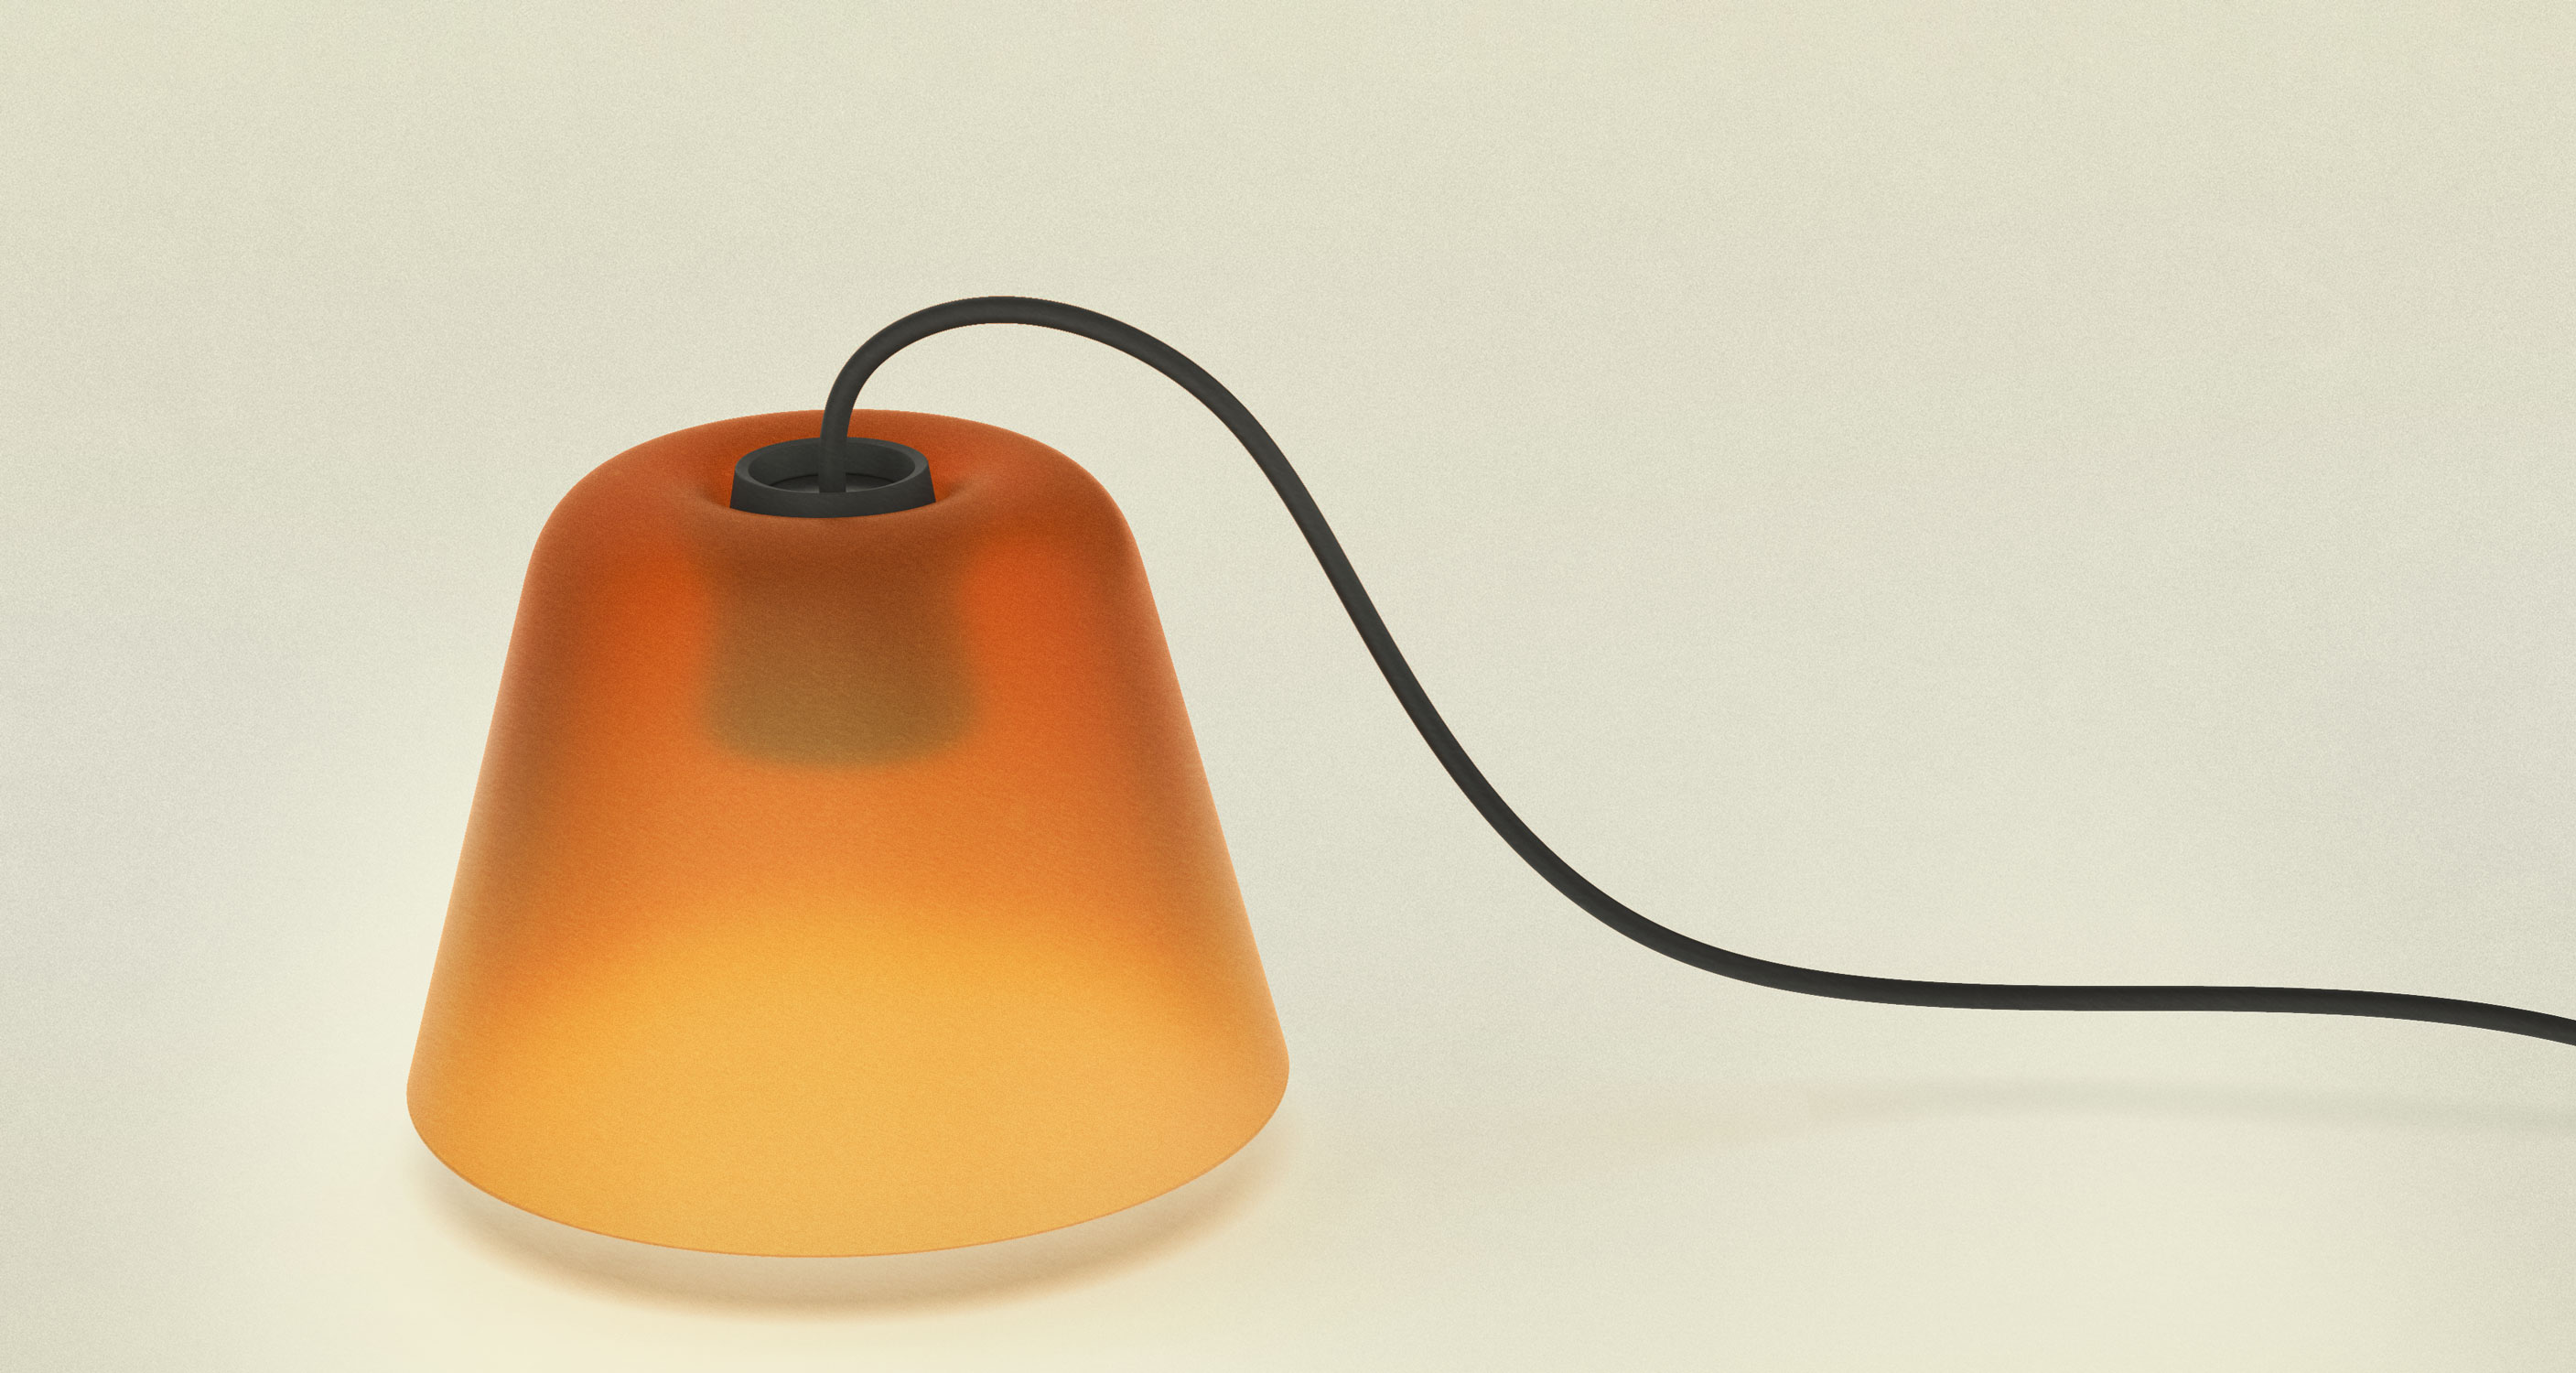 Typologie | Luminaire artisanal en série - Apricot lamp shade with cone